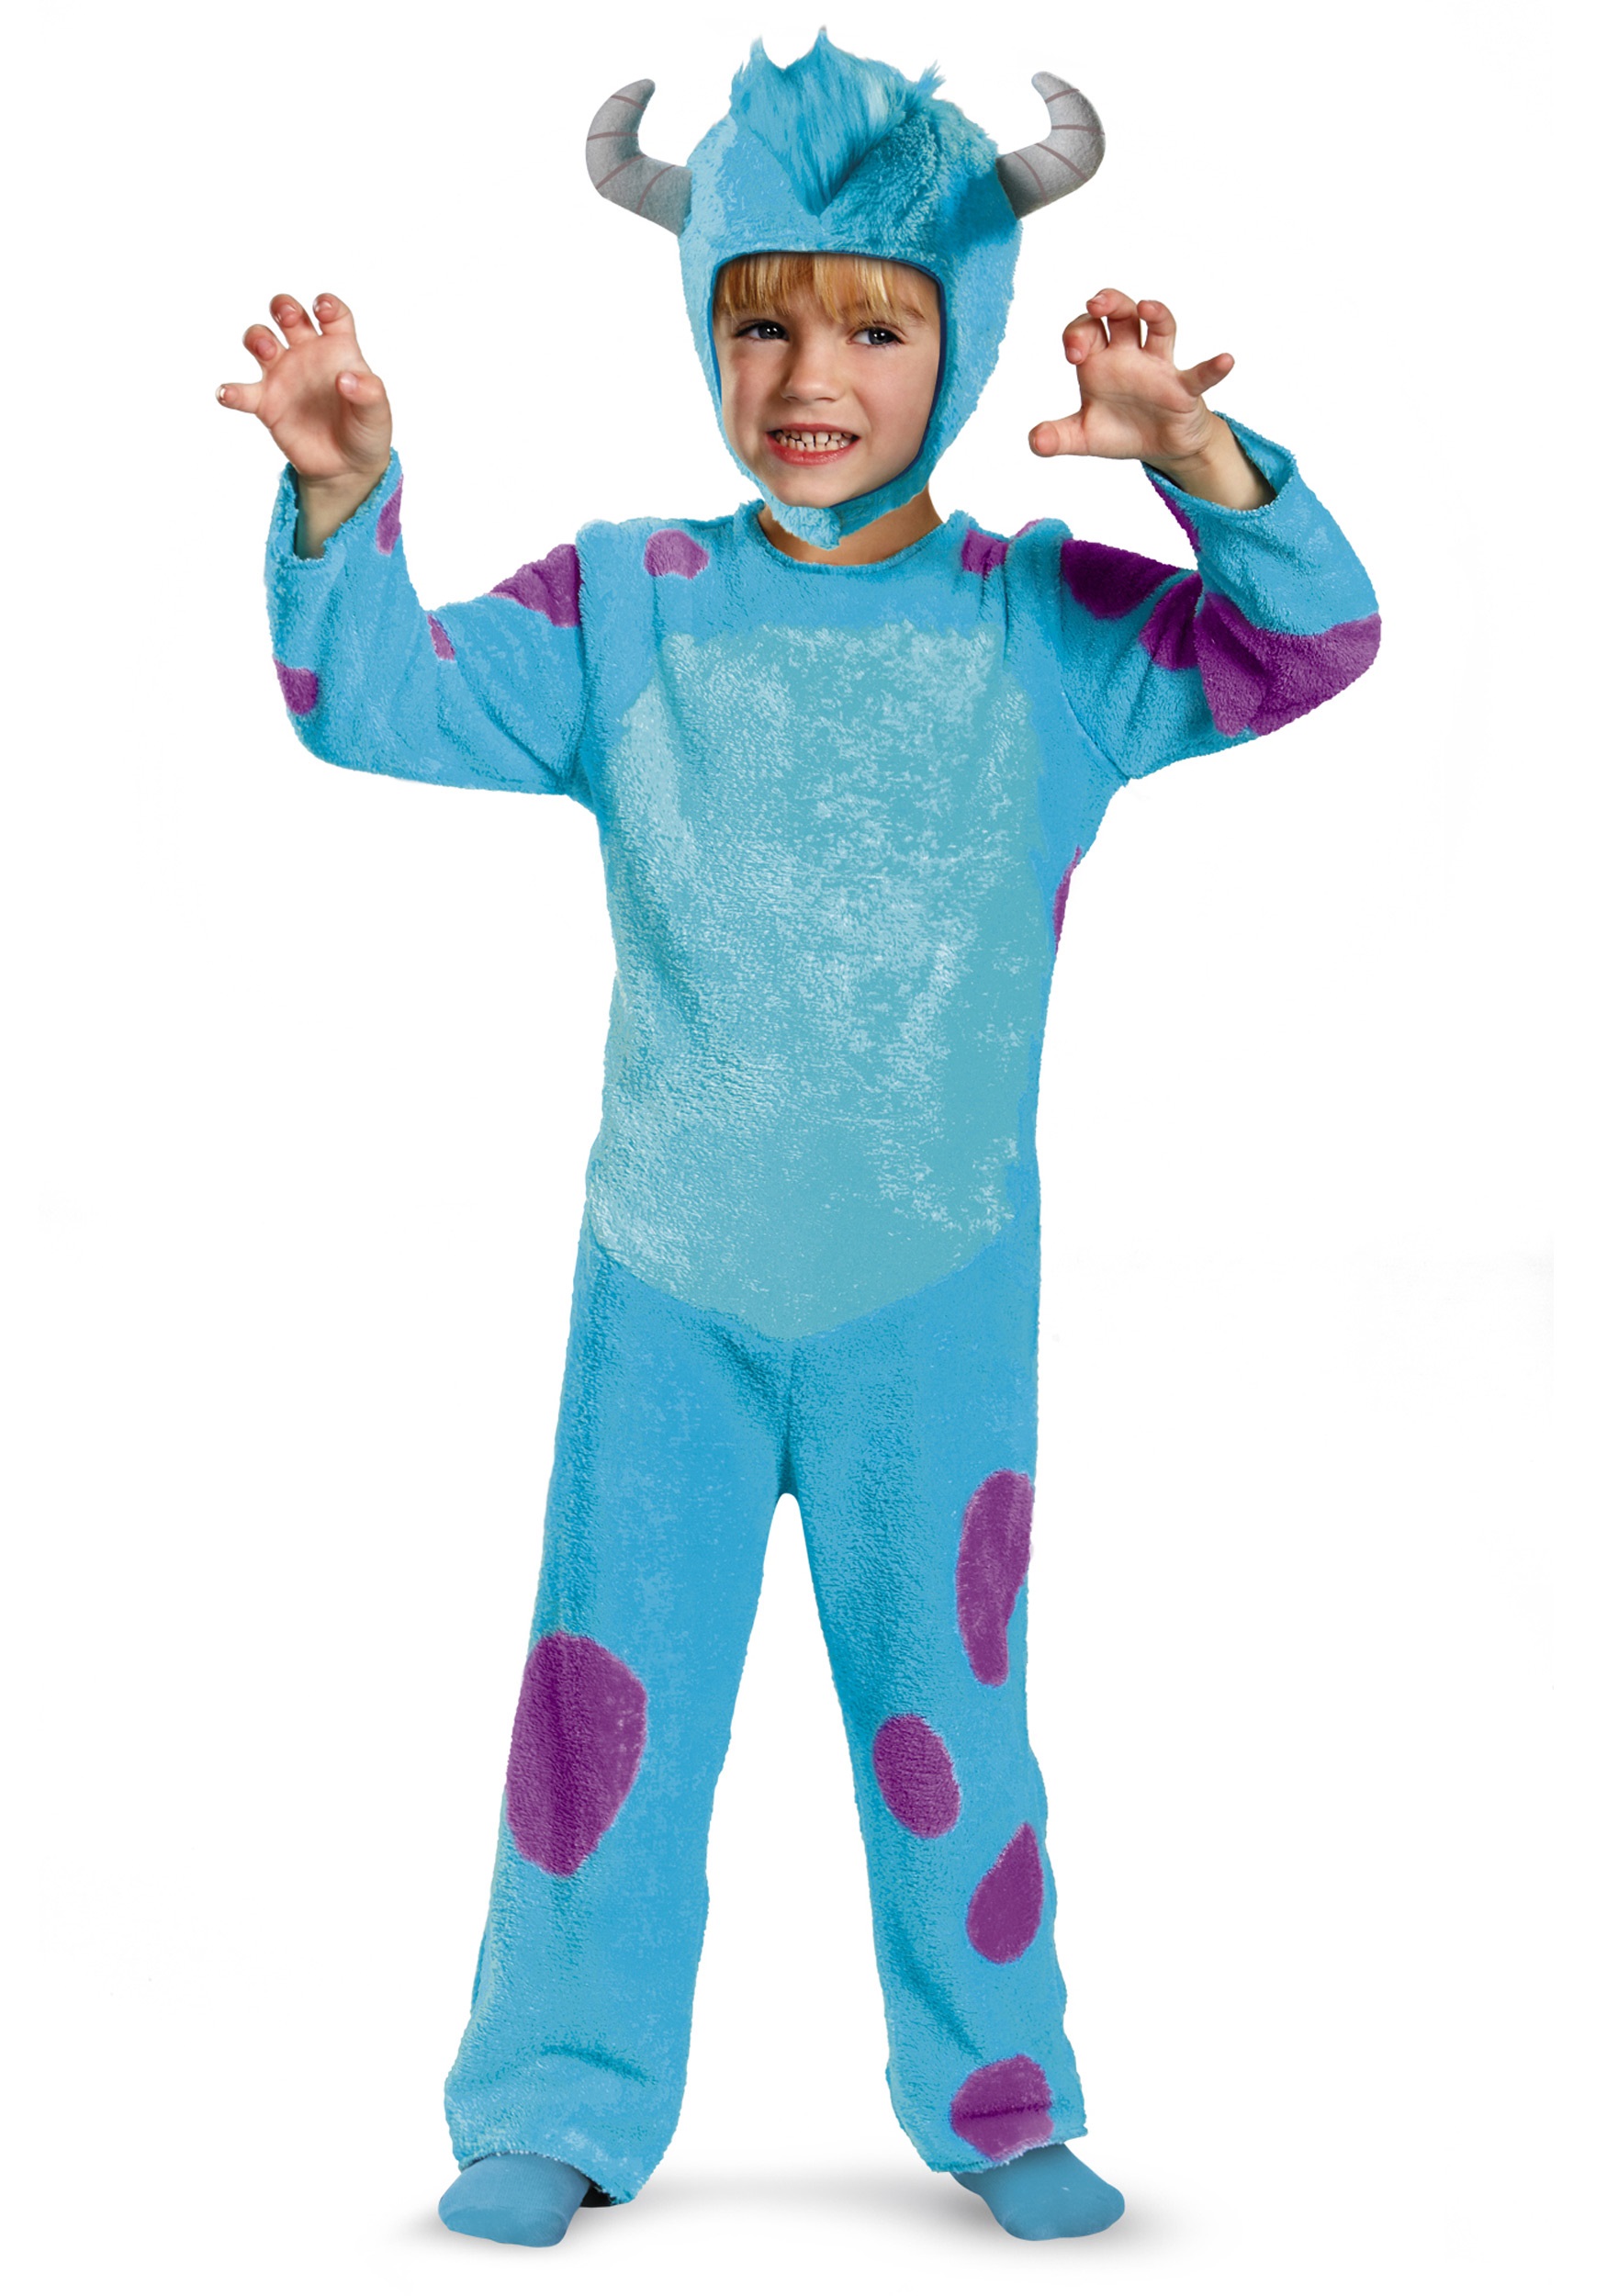 Photos - Fancy Dress Classic Disguise  Sulley Costume for Toddlers | Toddler Disney Costumes Pur 